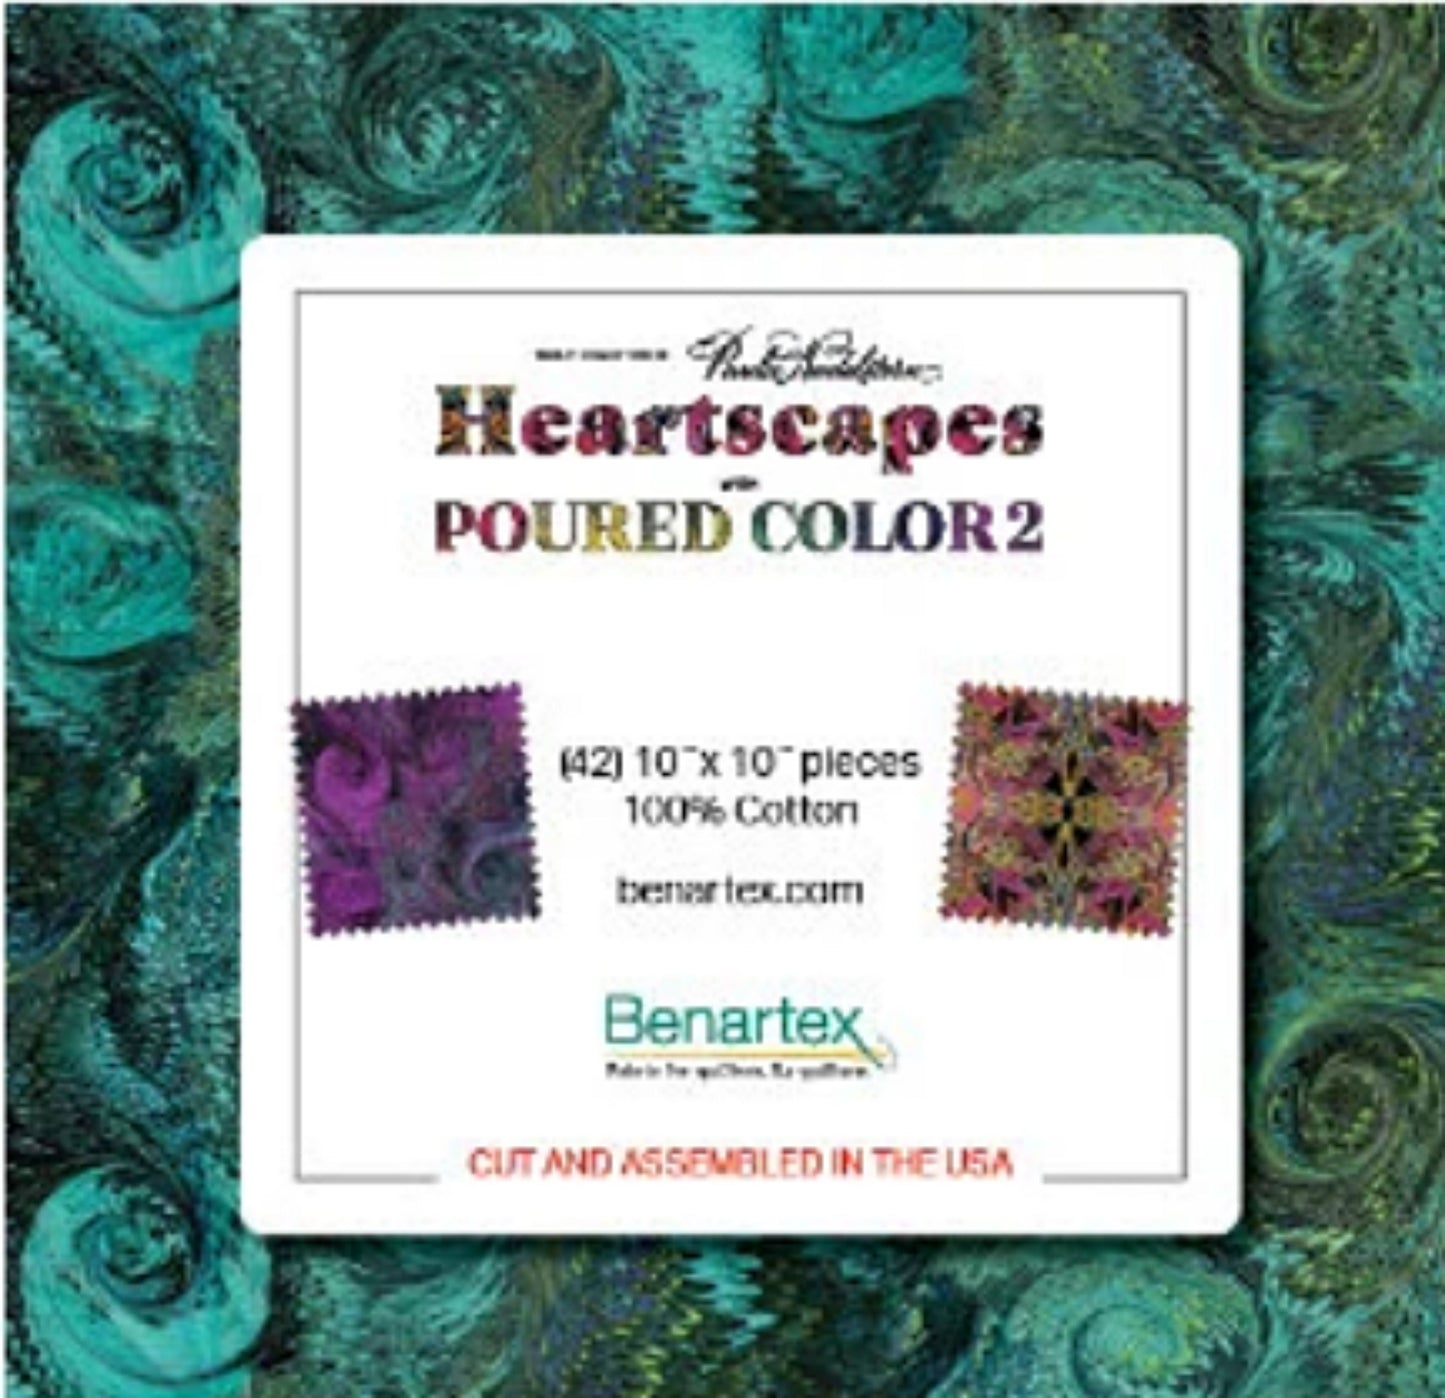 Heartscapes Poured Color 2 Layer Cake 10 x 10 in | Paula Nadelstern for Benartex 42 Piece Layer Cake